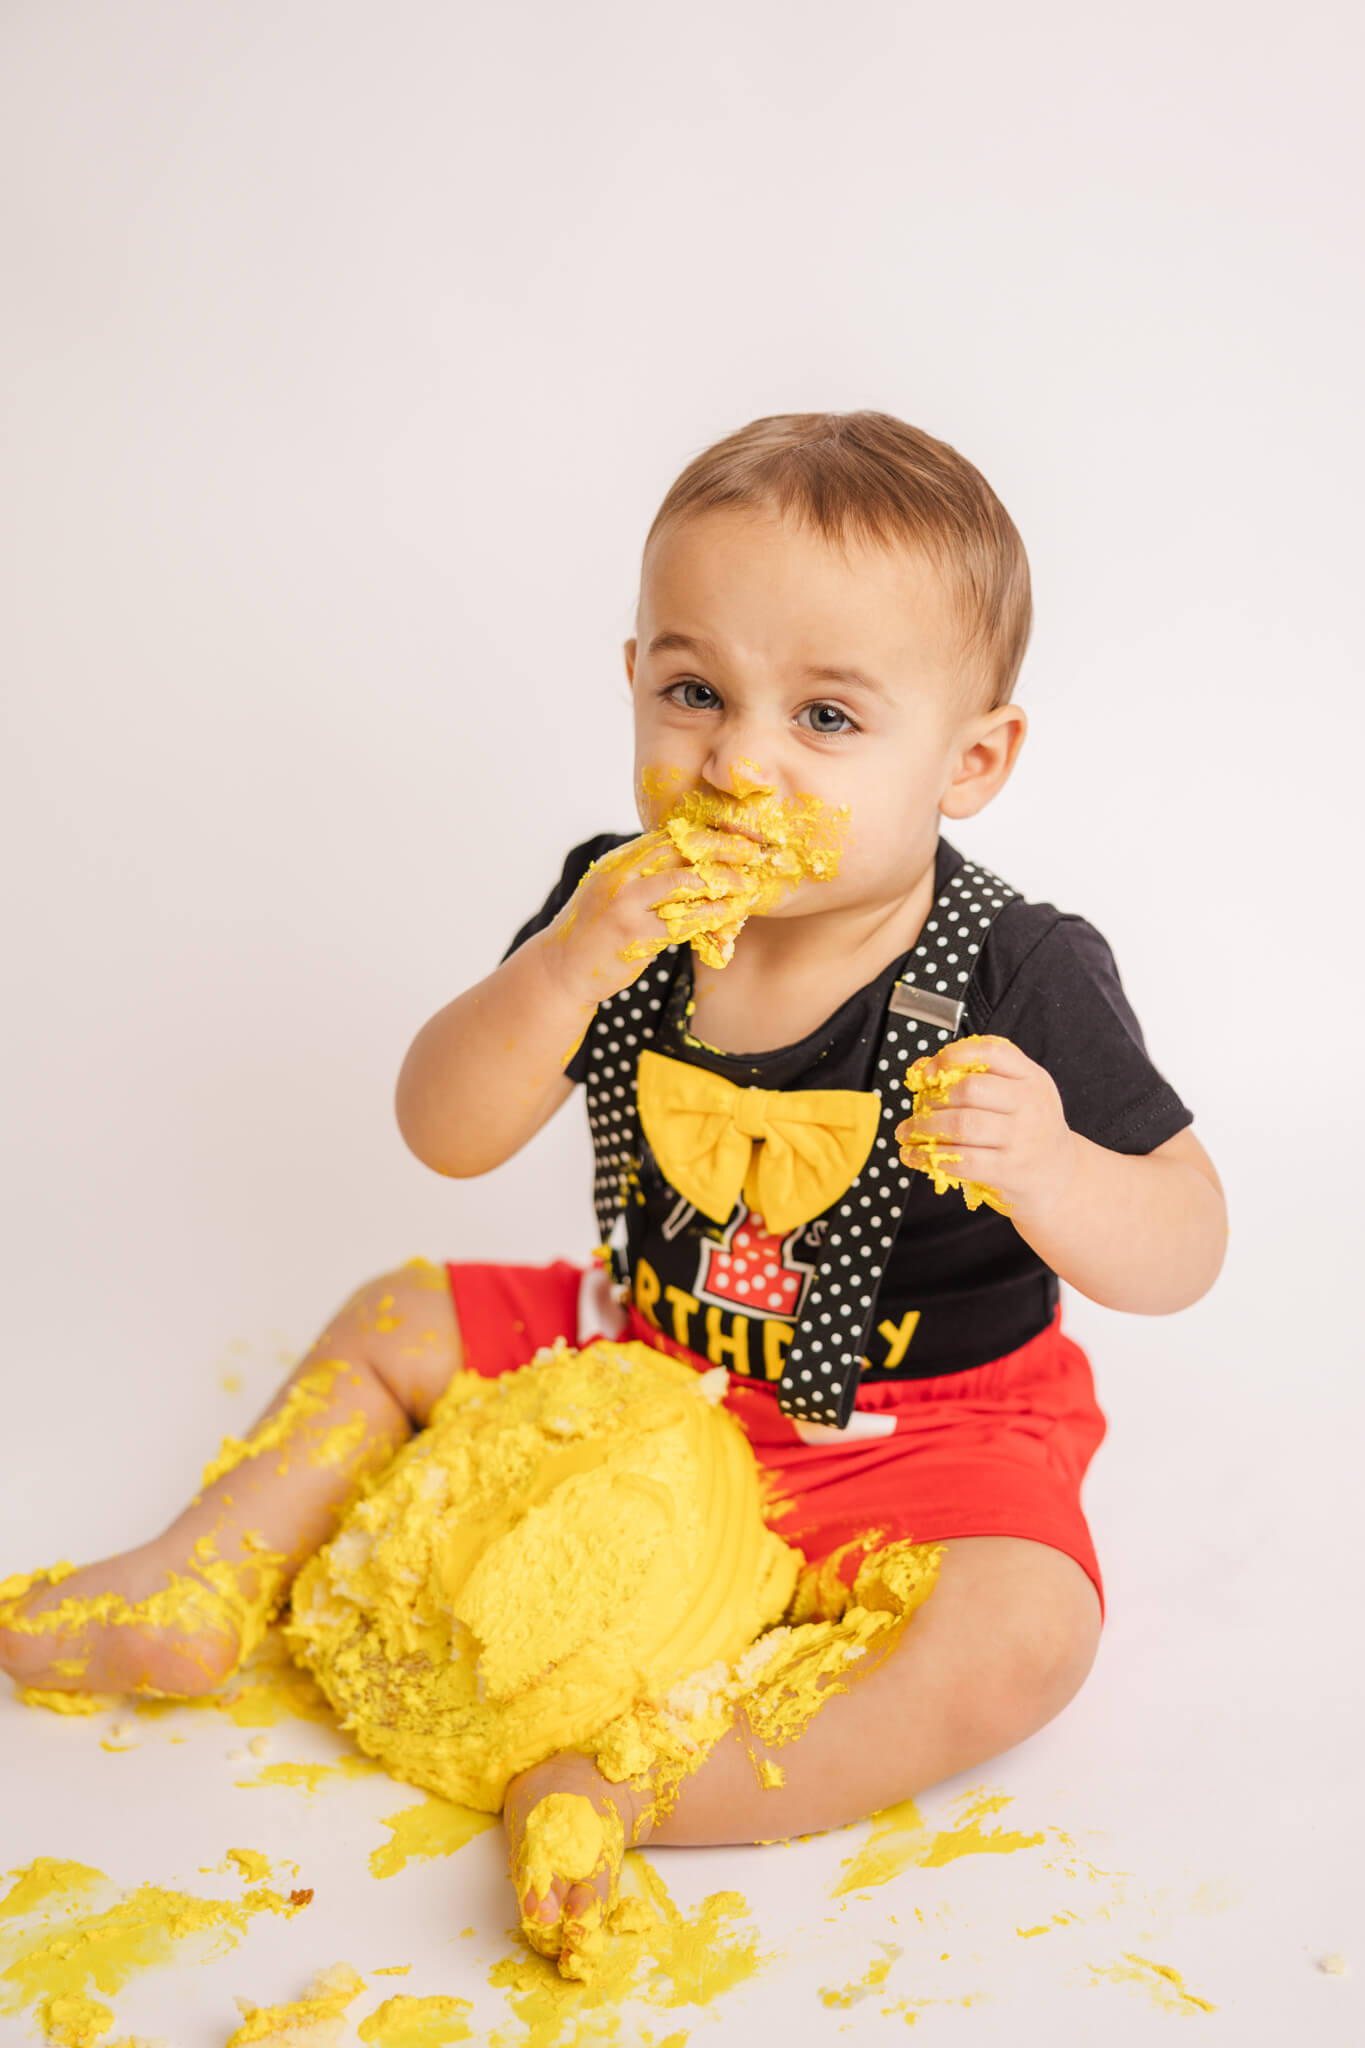 little boy in black and red eating his yellow birthday cake